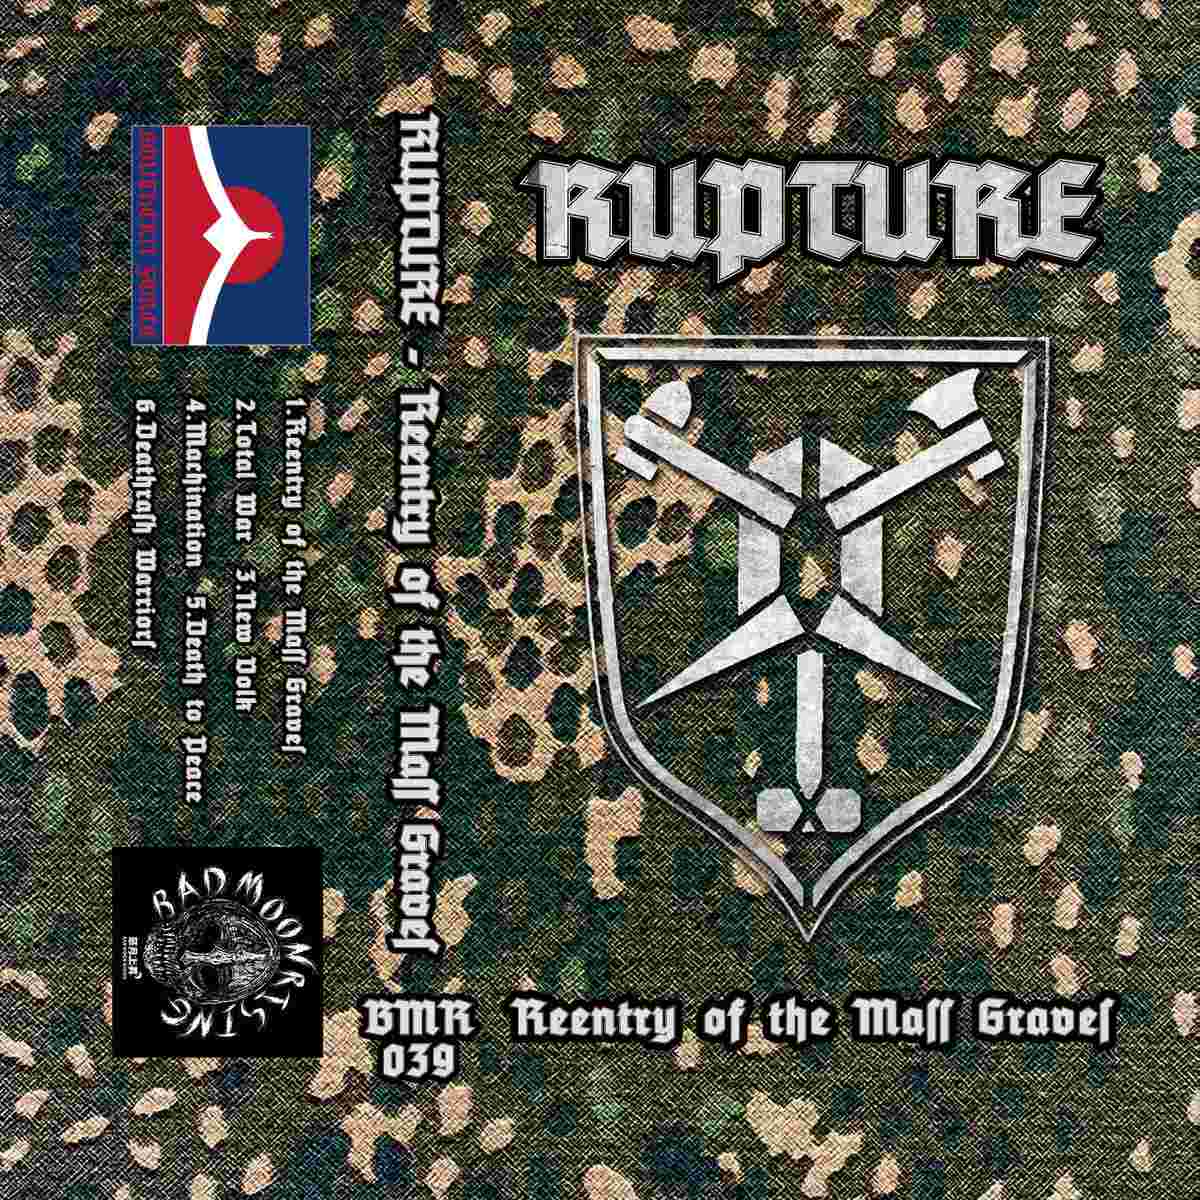 Rupture(China) - Reentry of the Mass Graves tape  - Bad Moon Rising 							 image 1